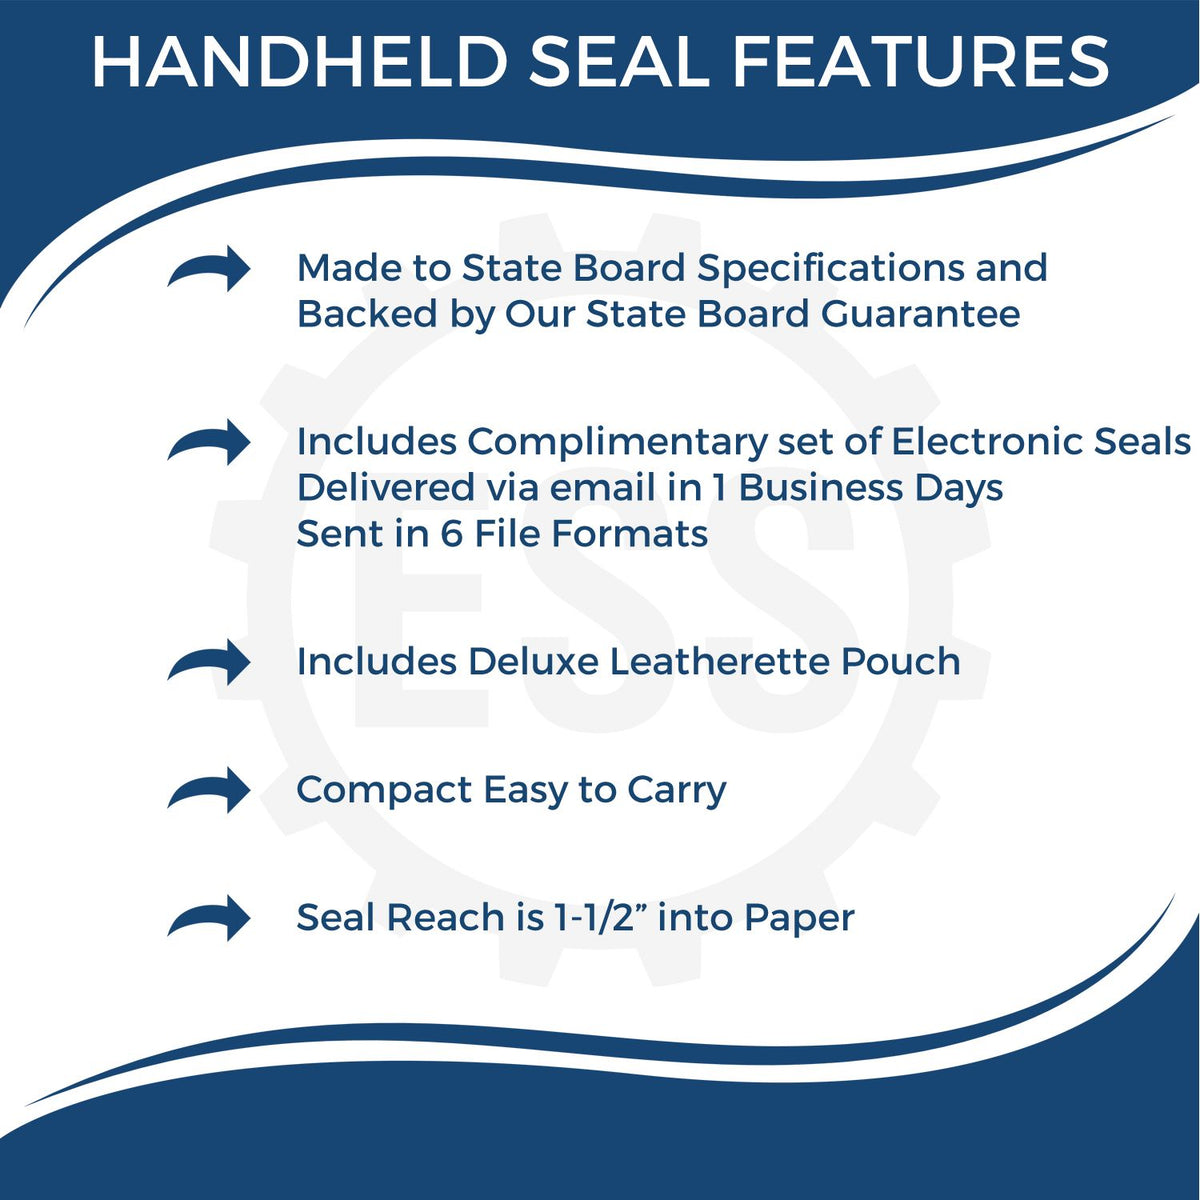 A picture of an infographic highlighting the selling points for the Handheld Maryland Land Surveyor Seal